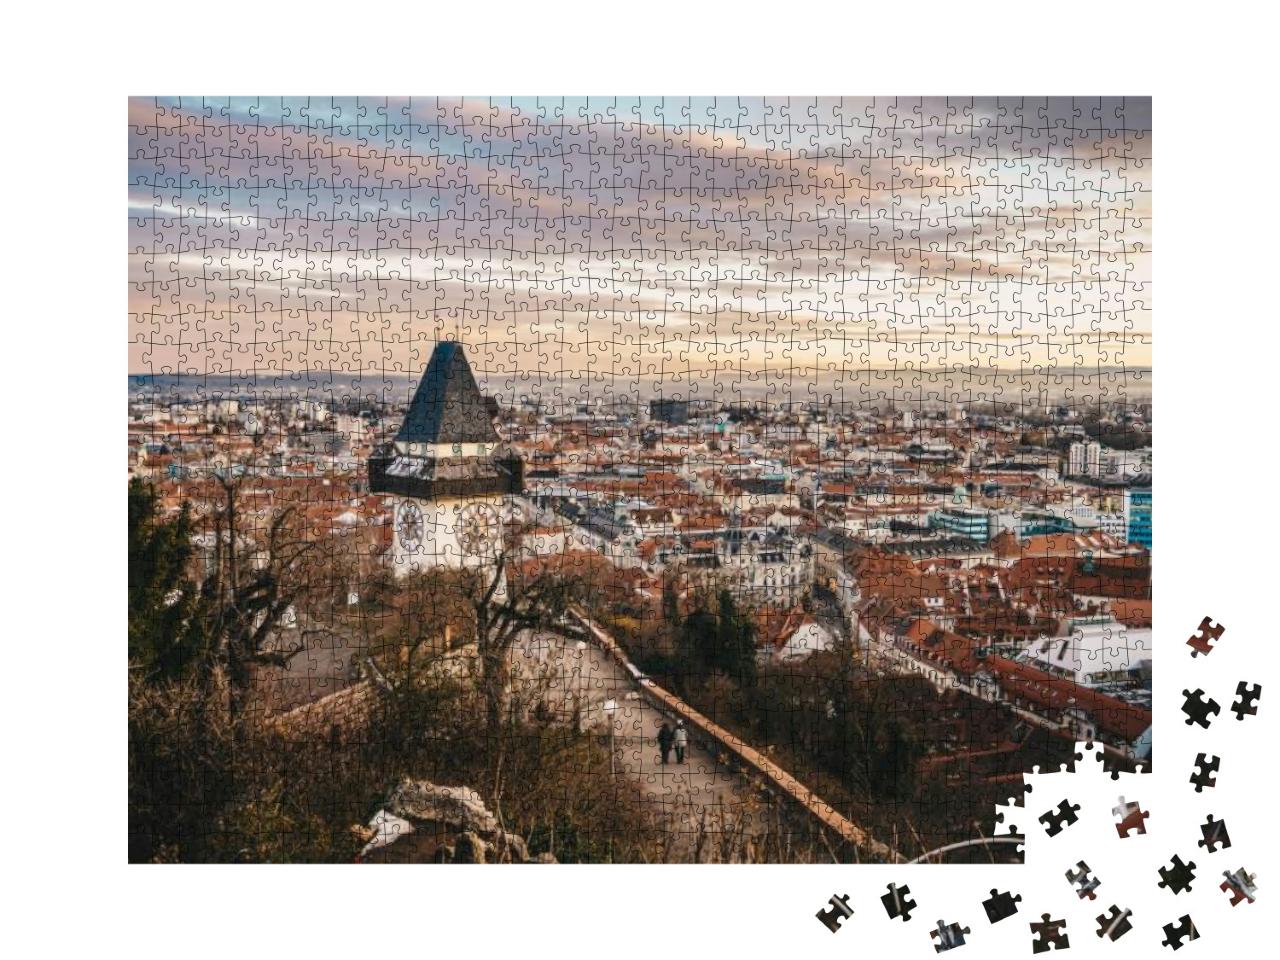 Graz from Above. Sunset in Graz, Austria... Jigsaw Puzzle with 1000 pieces